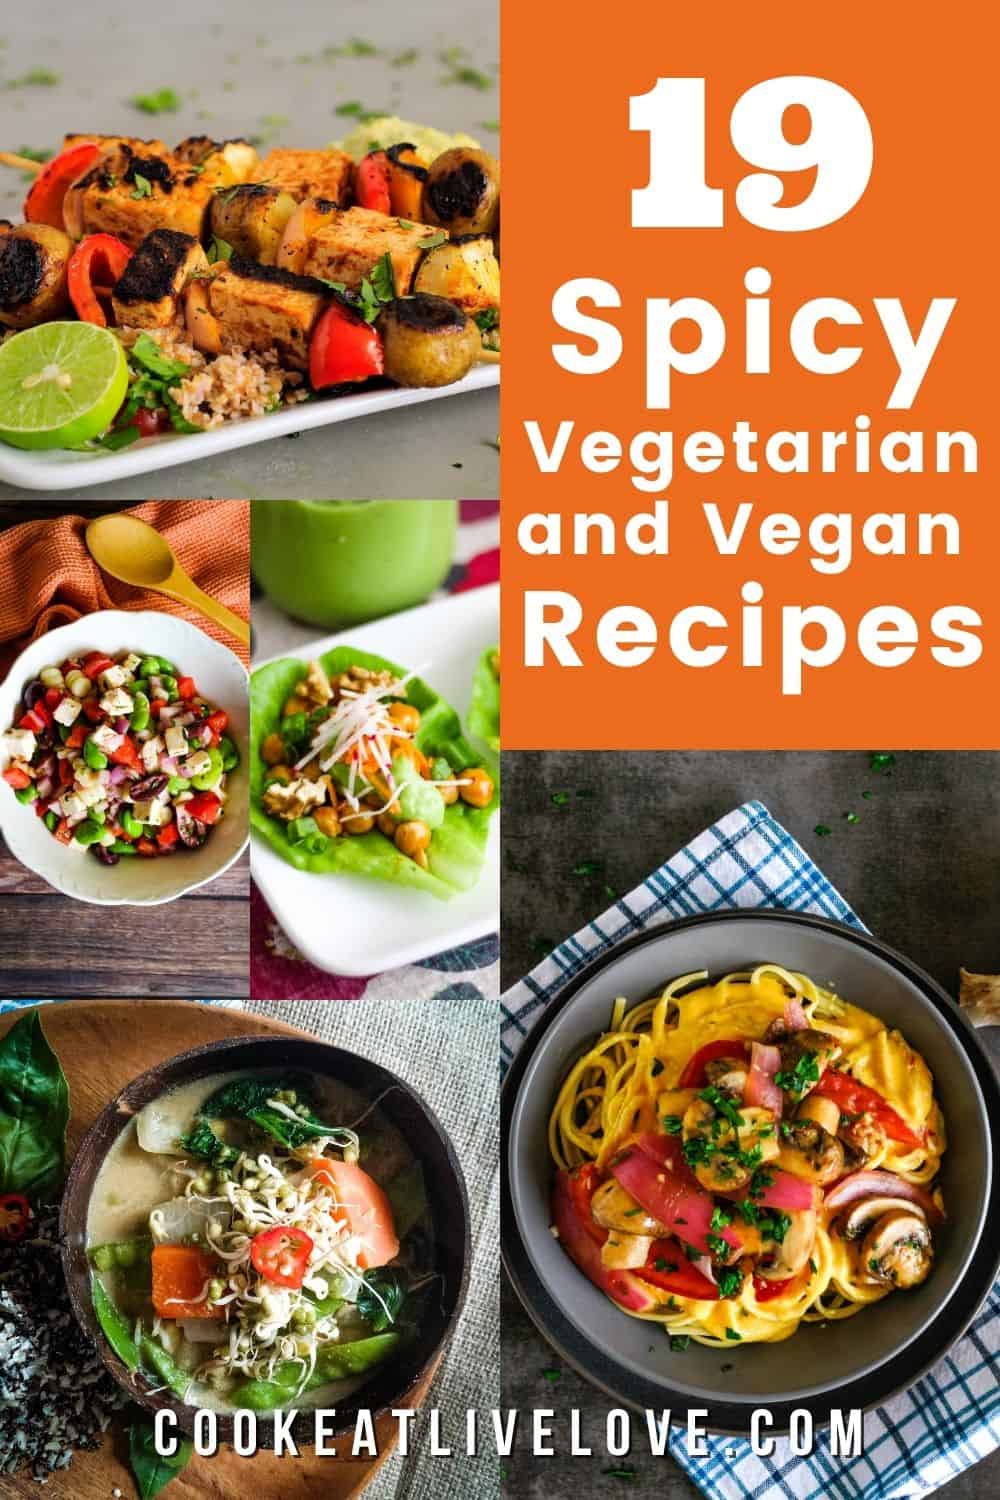 Serving Up The Best Spicy Vegetarian Recipes - Cook Eat Live Love